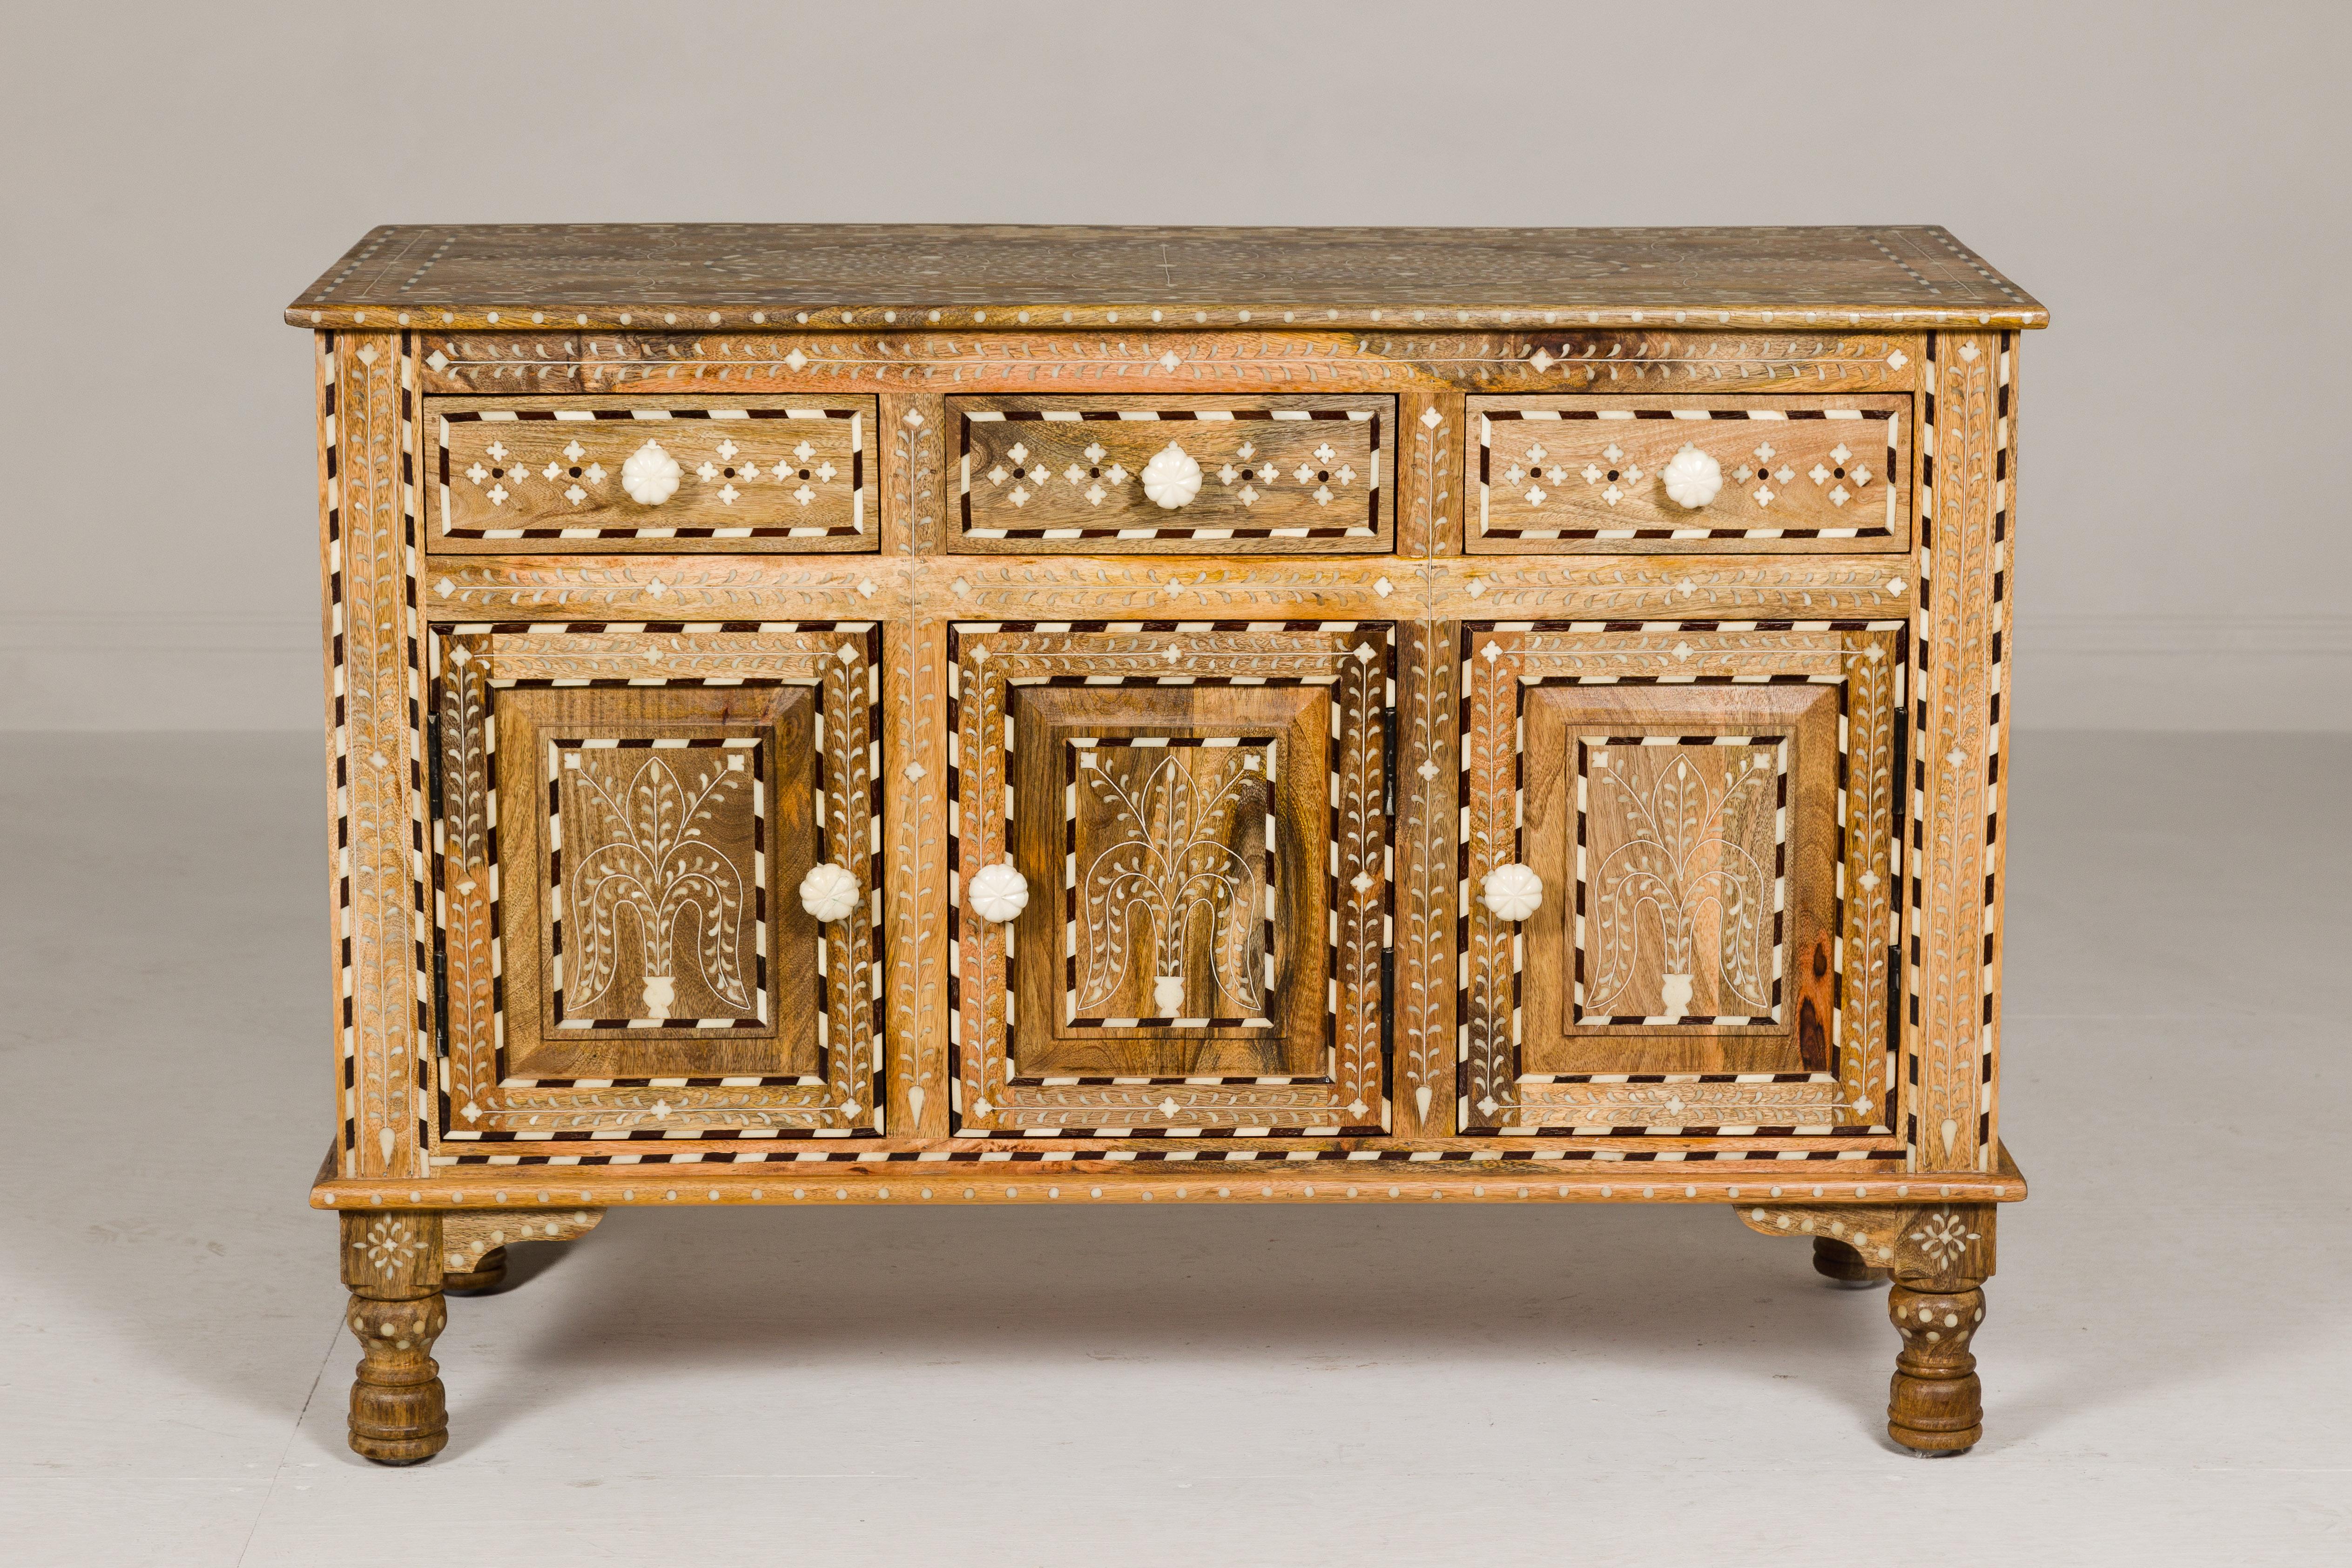 Anglo-Indian style richly inlaid mango wood buffet with three drawers over three doors and dark patina. This Anglo-Indian style mango wood buffet is a true work of art, a testament to exquisite craftsmanship and timeless design. Richly inlaid with